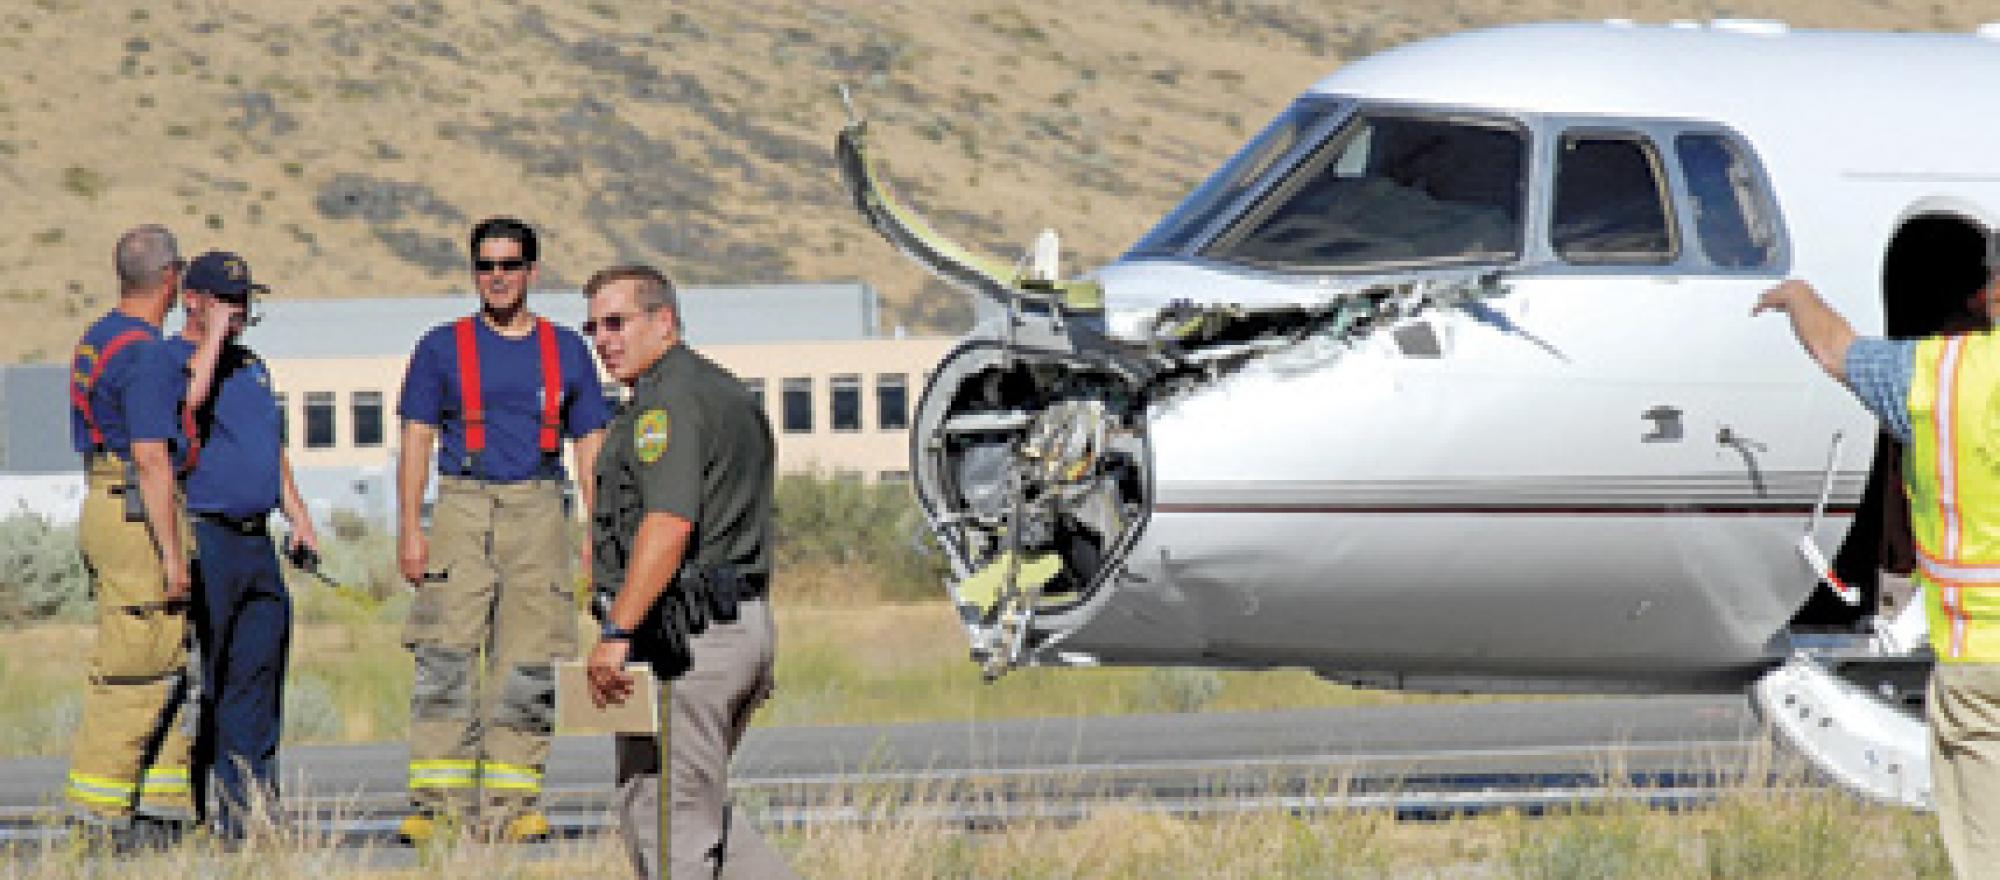 In the aftermath of the nonfatal collision of a Hawker 800XP and a sailplane 